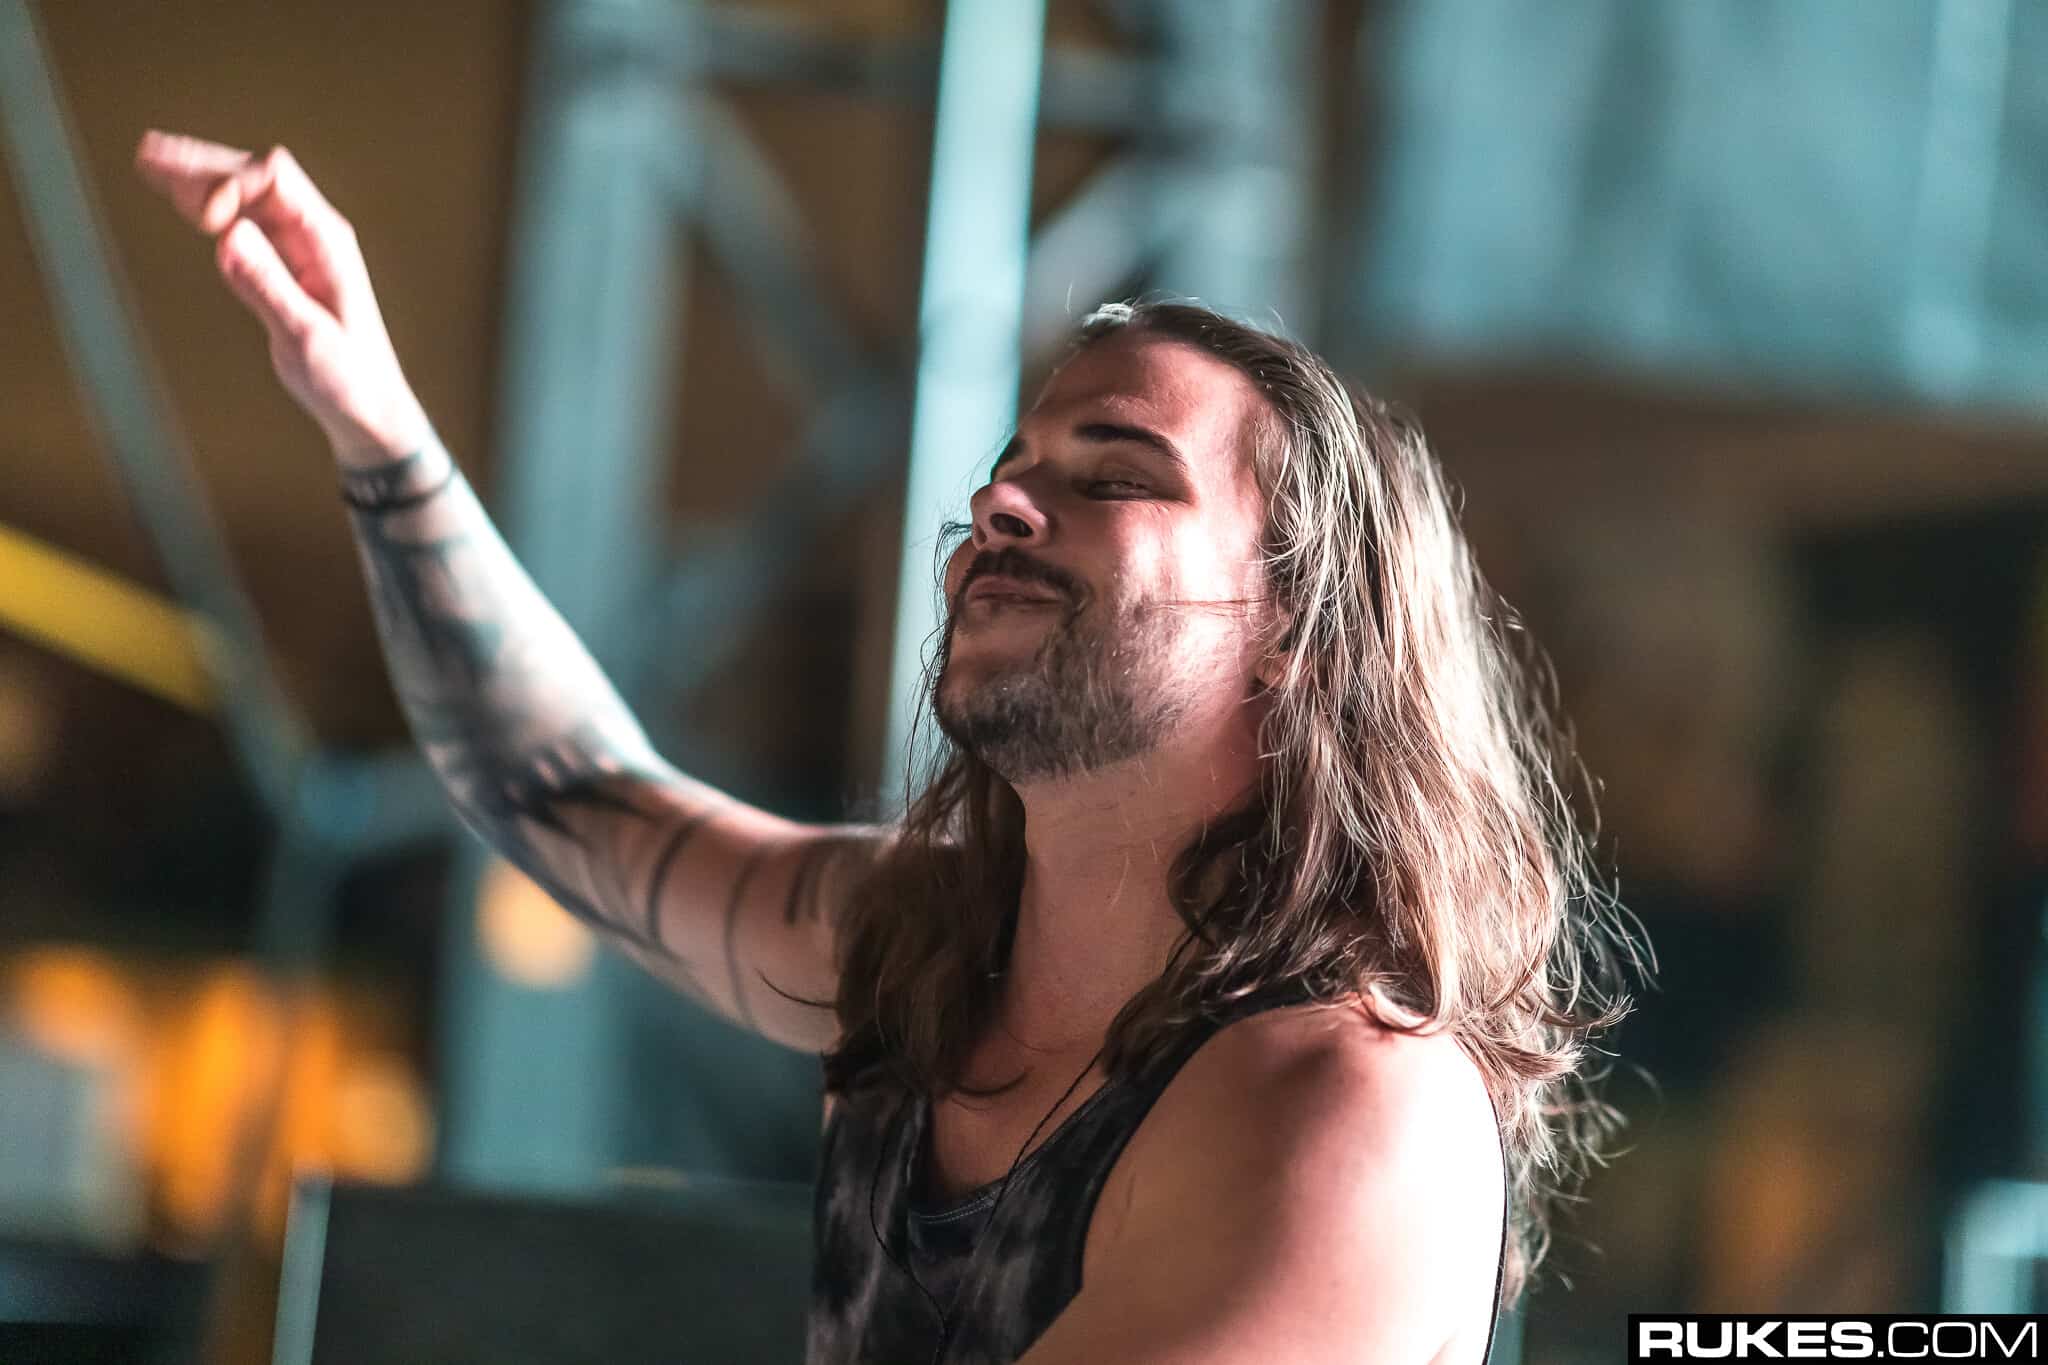 Seven Lions set for the first release of 2020